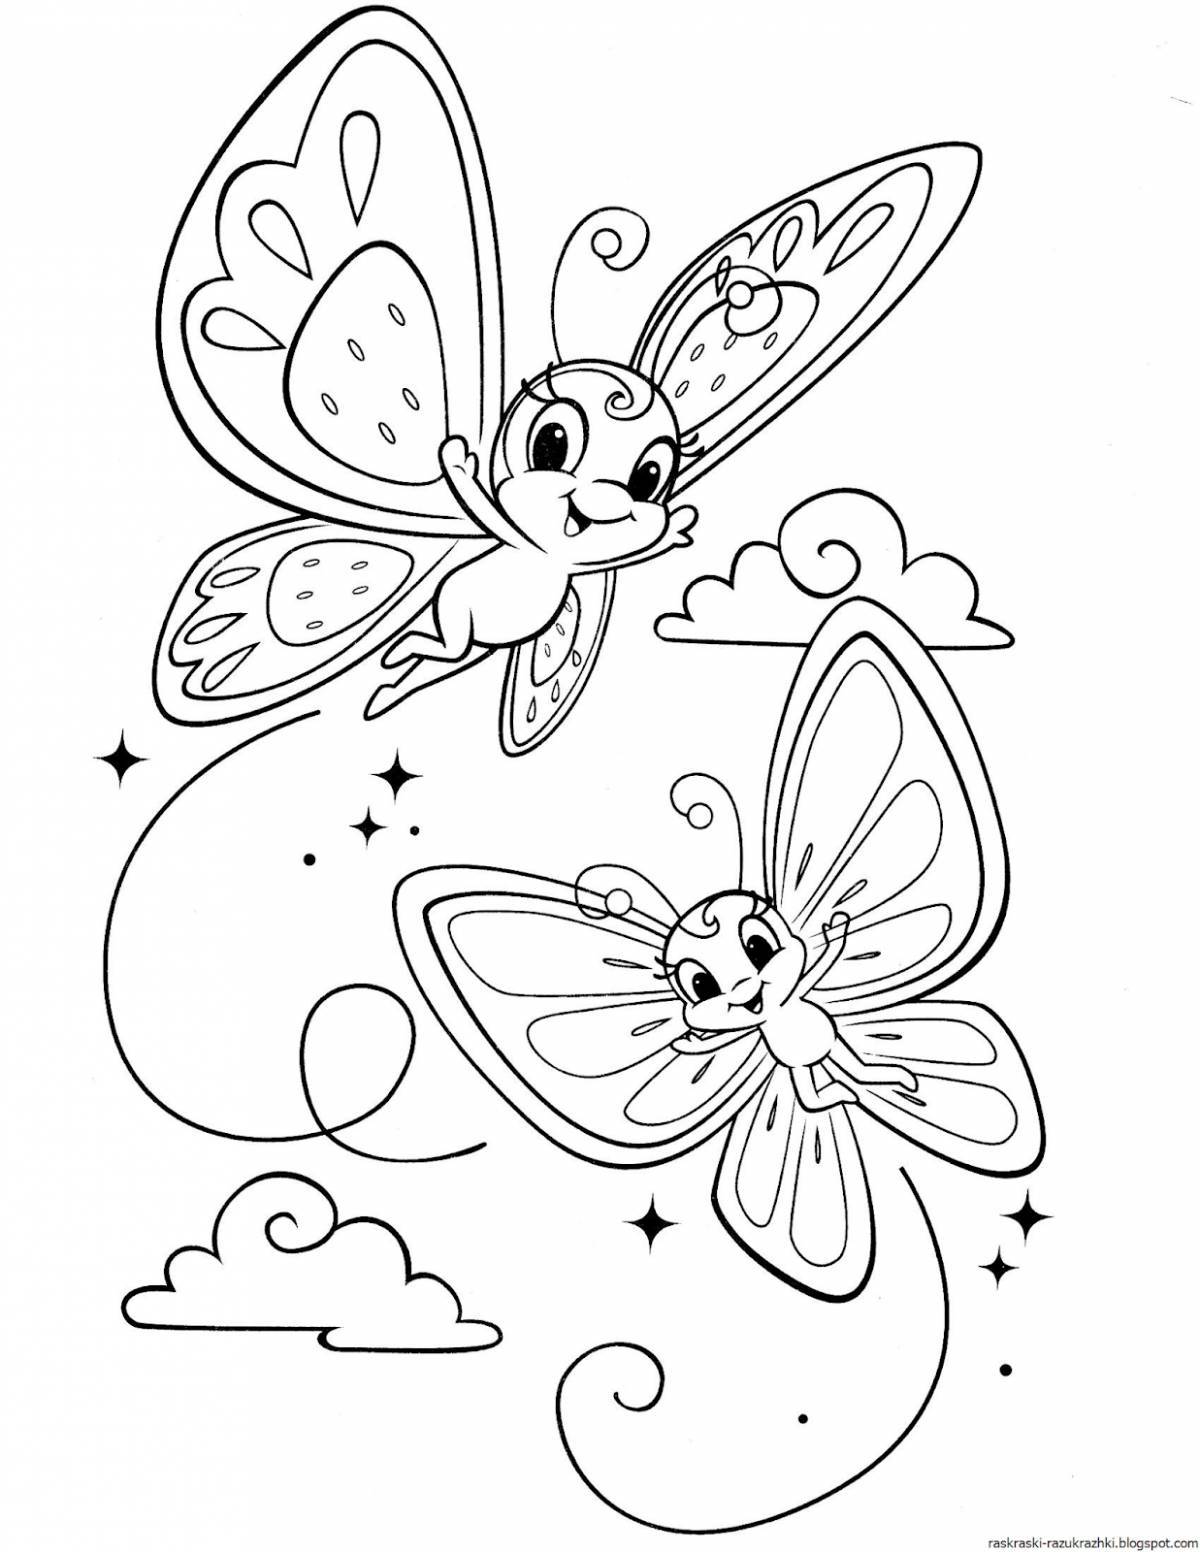 Fabulous butterfly coloring pages for 6-7 year olds